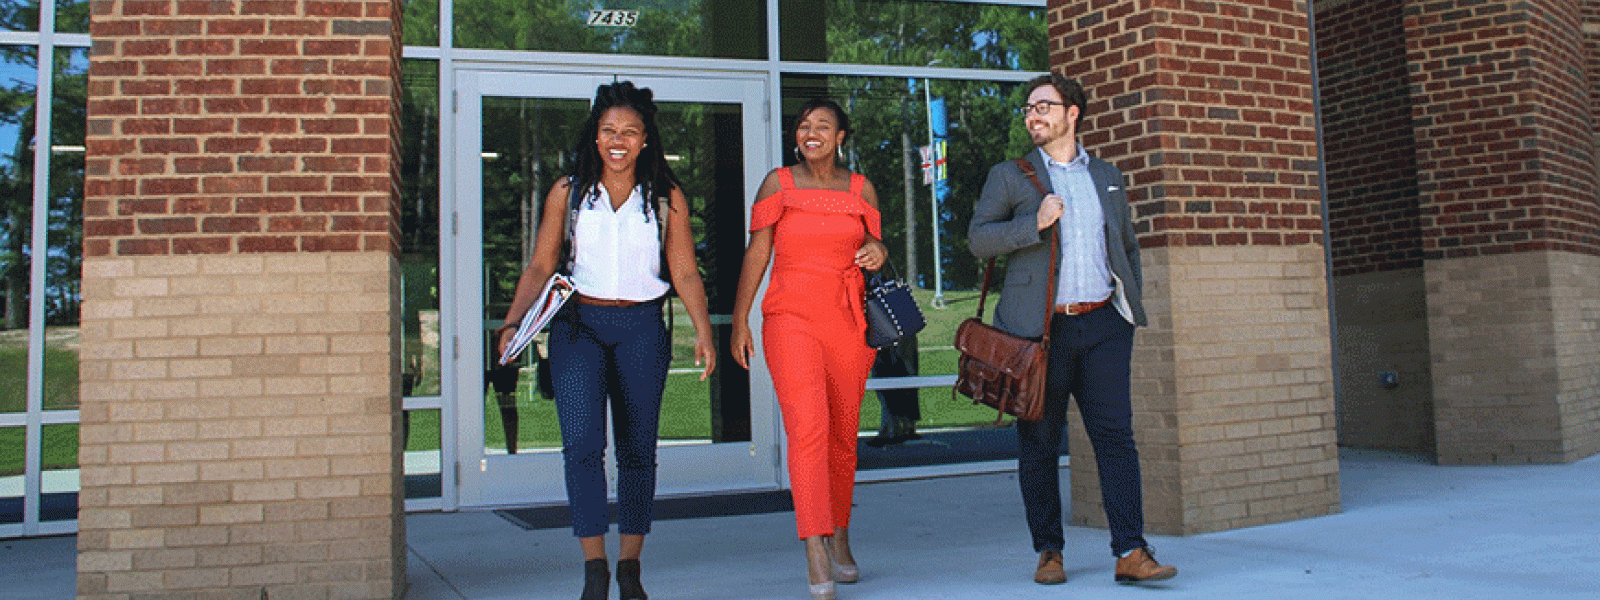 CIU students outside the new William H. Jones Global Business & IT Center.